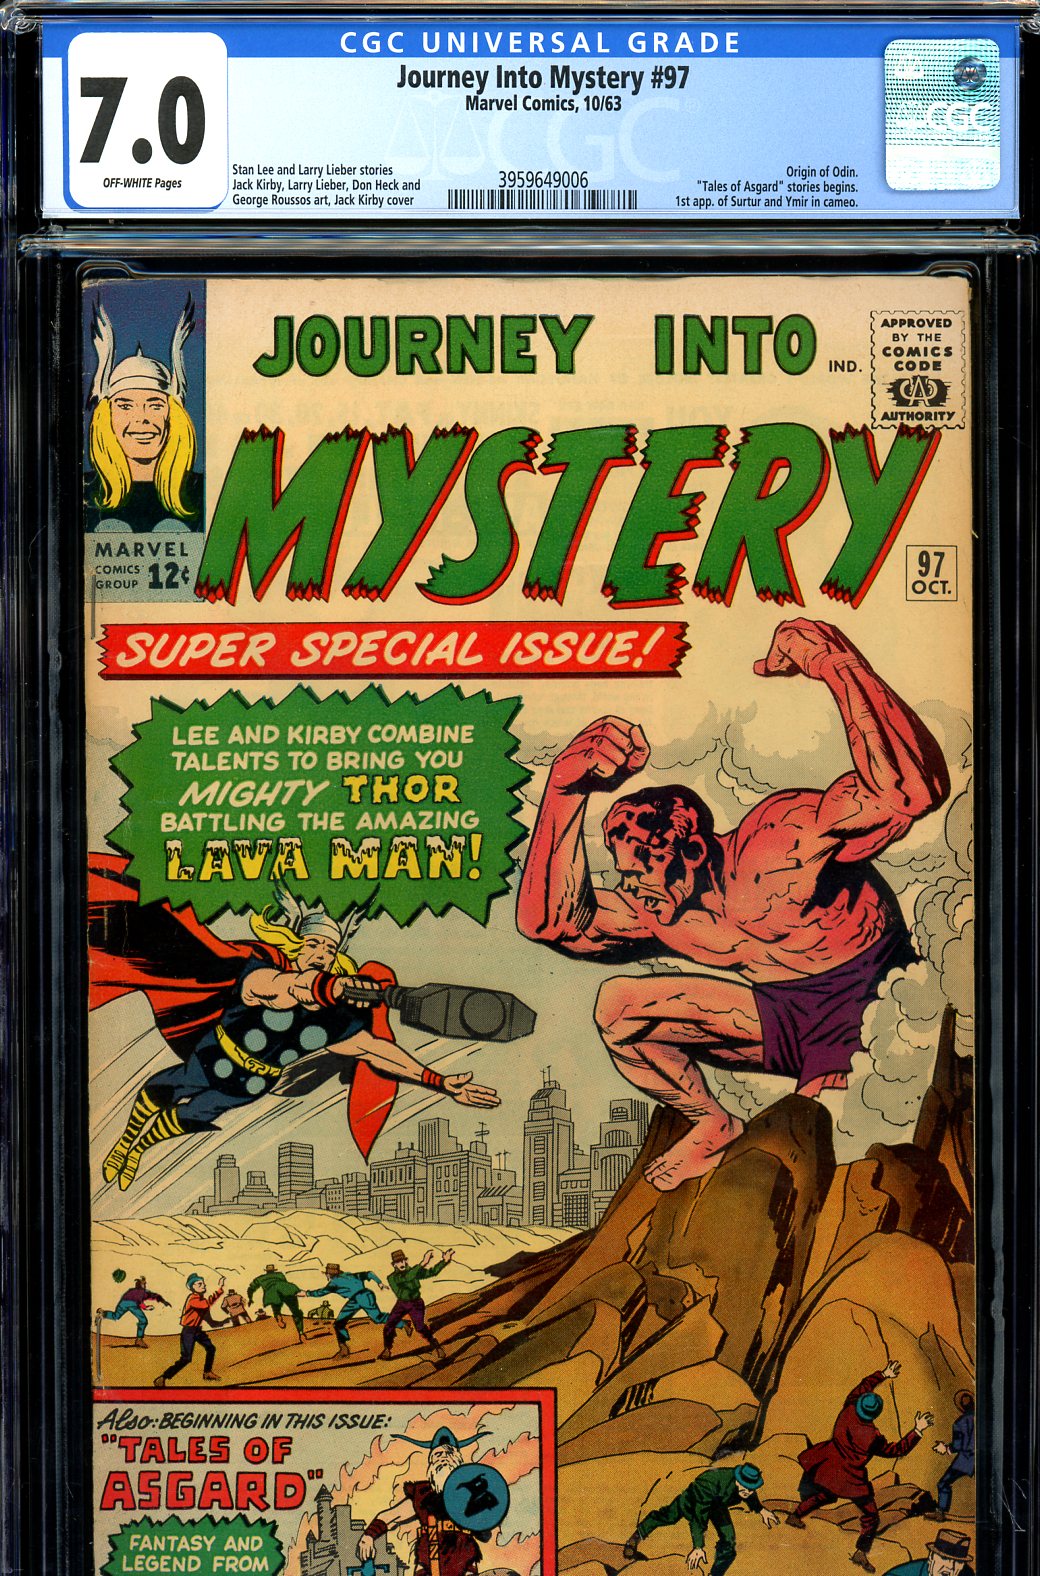 Journey Into Mystery #97 CGC 7.0 ow